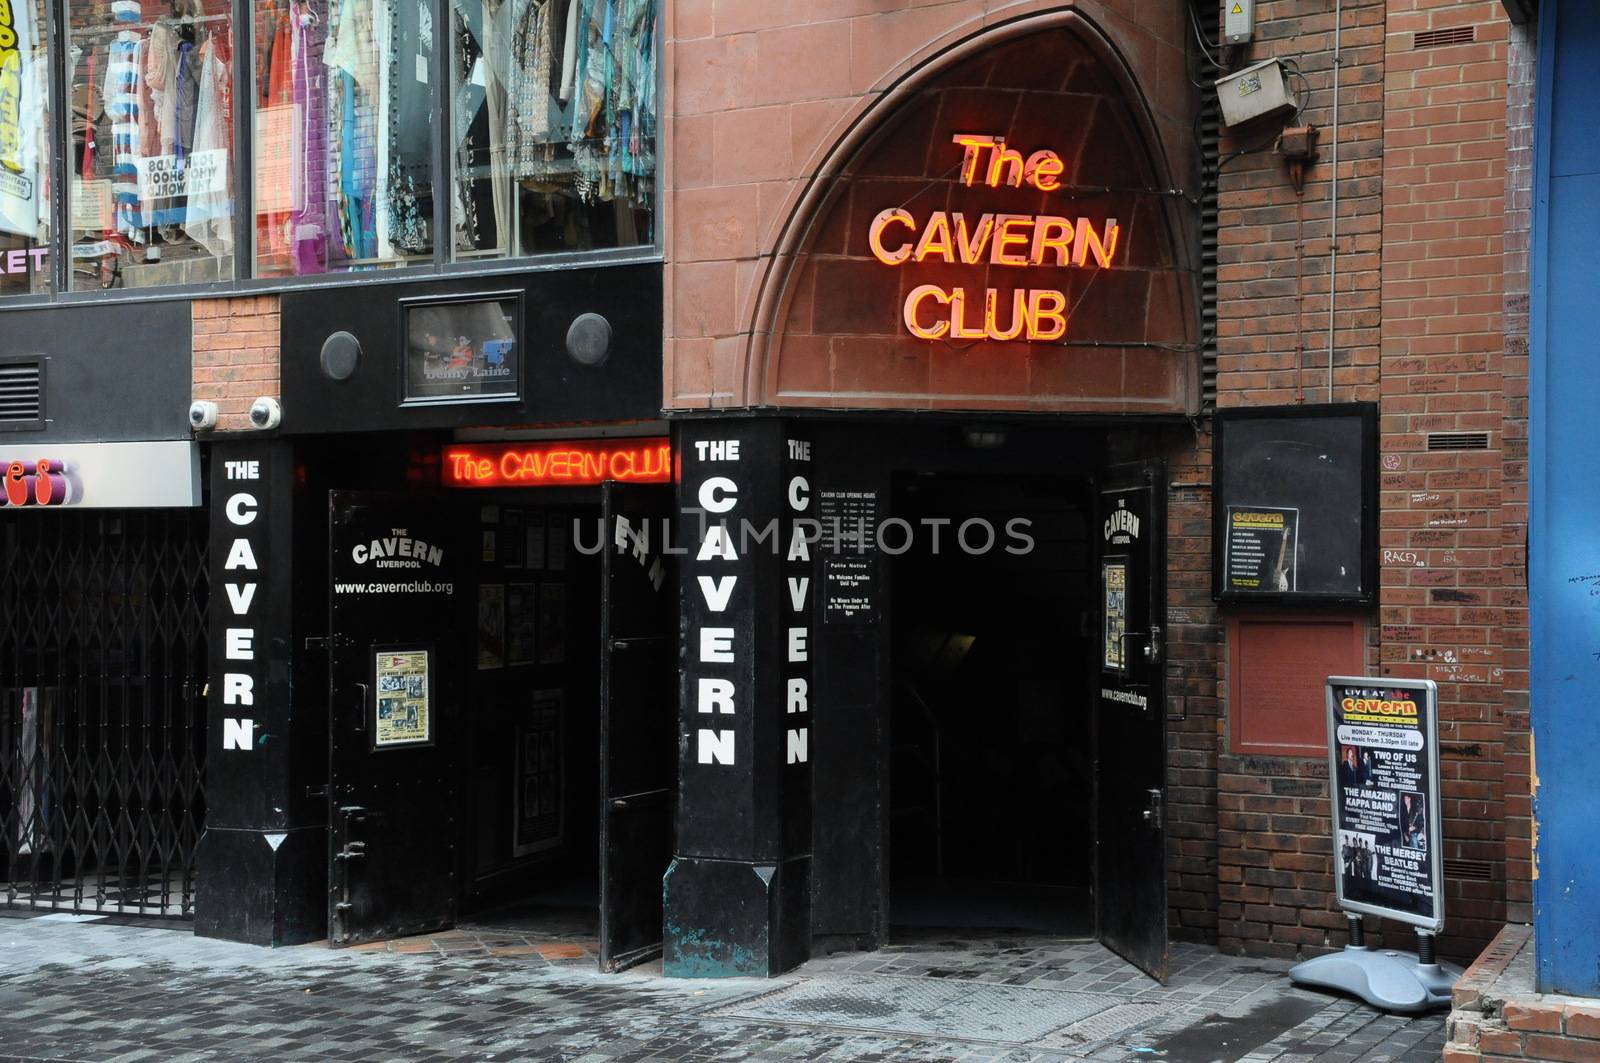 Liverpool's famous Cavern Club